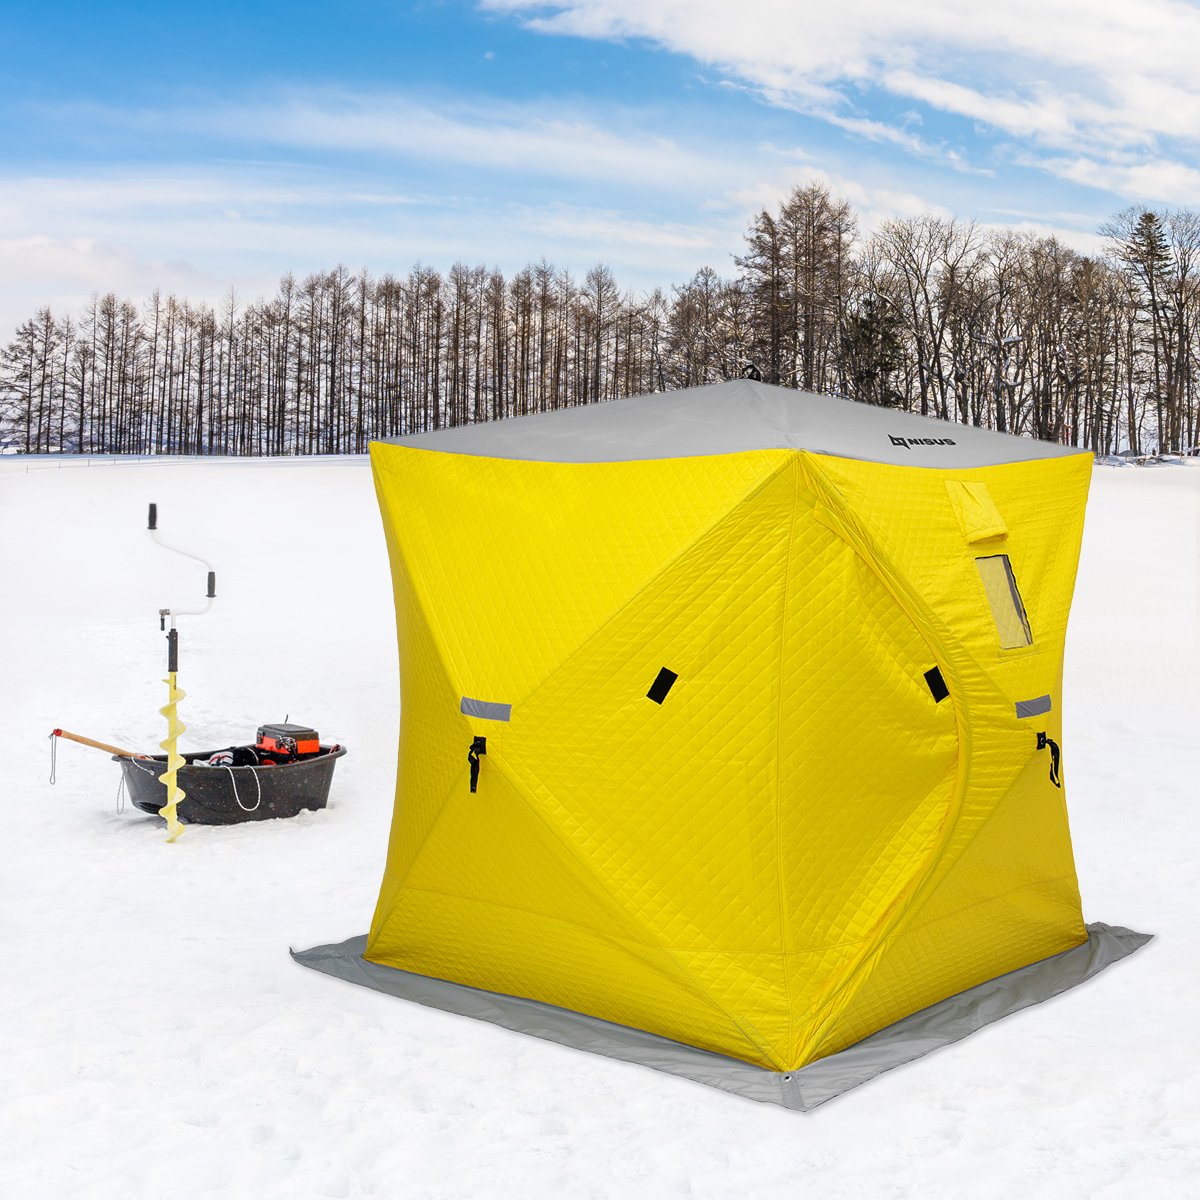 Cube Insulated Ice Fishing Shelter for 2 Persons, yellow, on ice together with Iceberg Siberia hand auger, and an ice sled